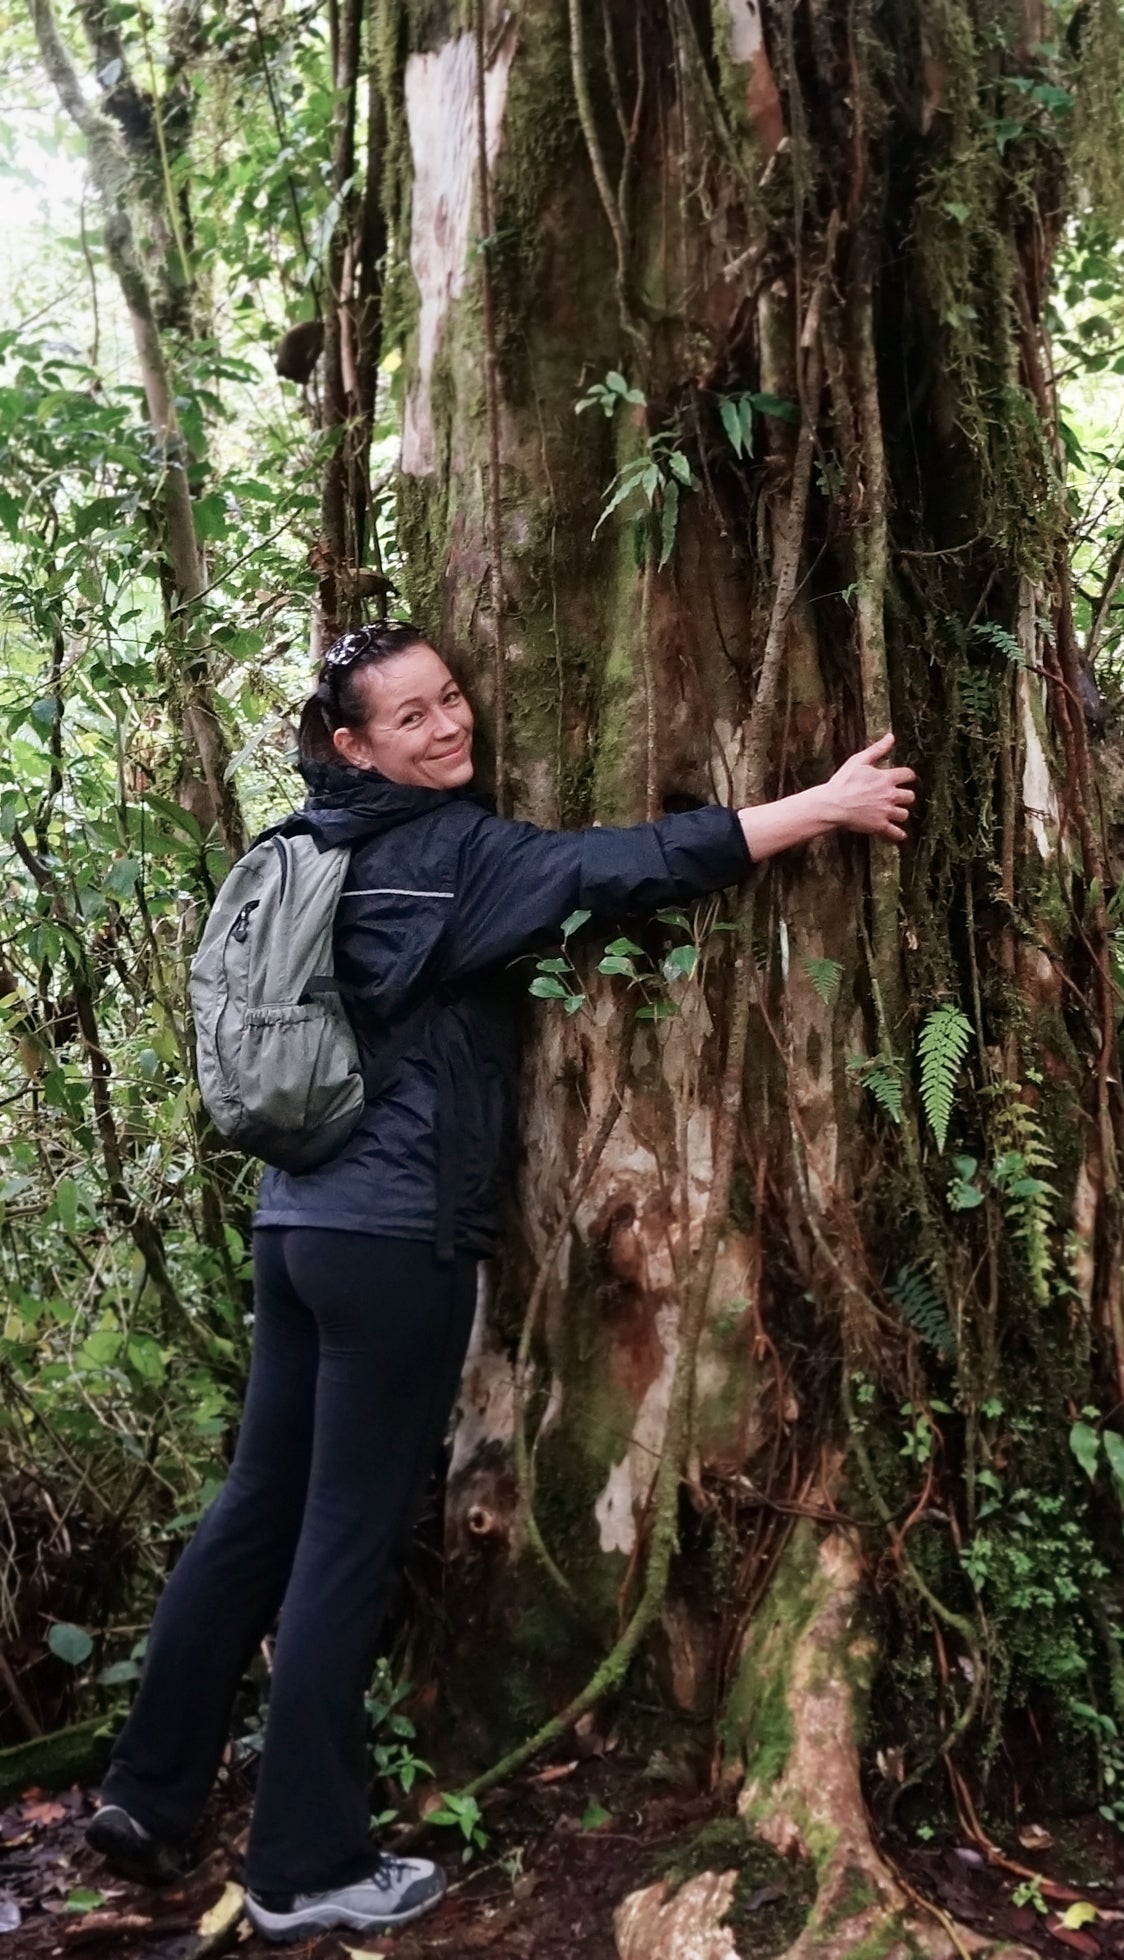 Image of Julie Shark hugging a tree in Costa Rica, circa 2012 when she was younger and cuter